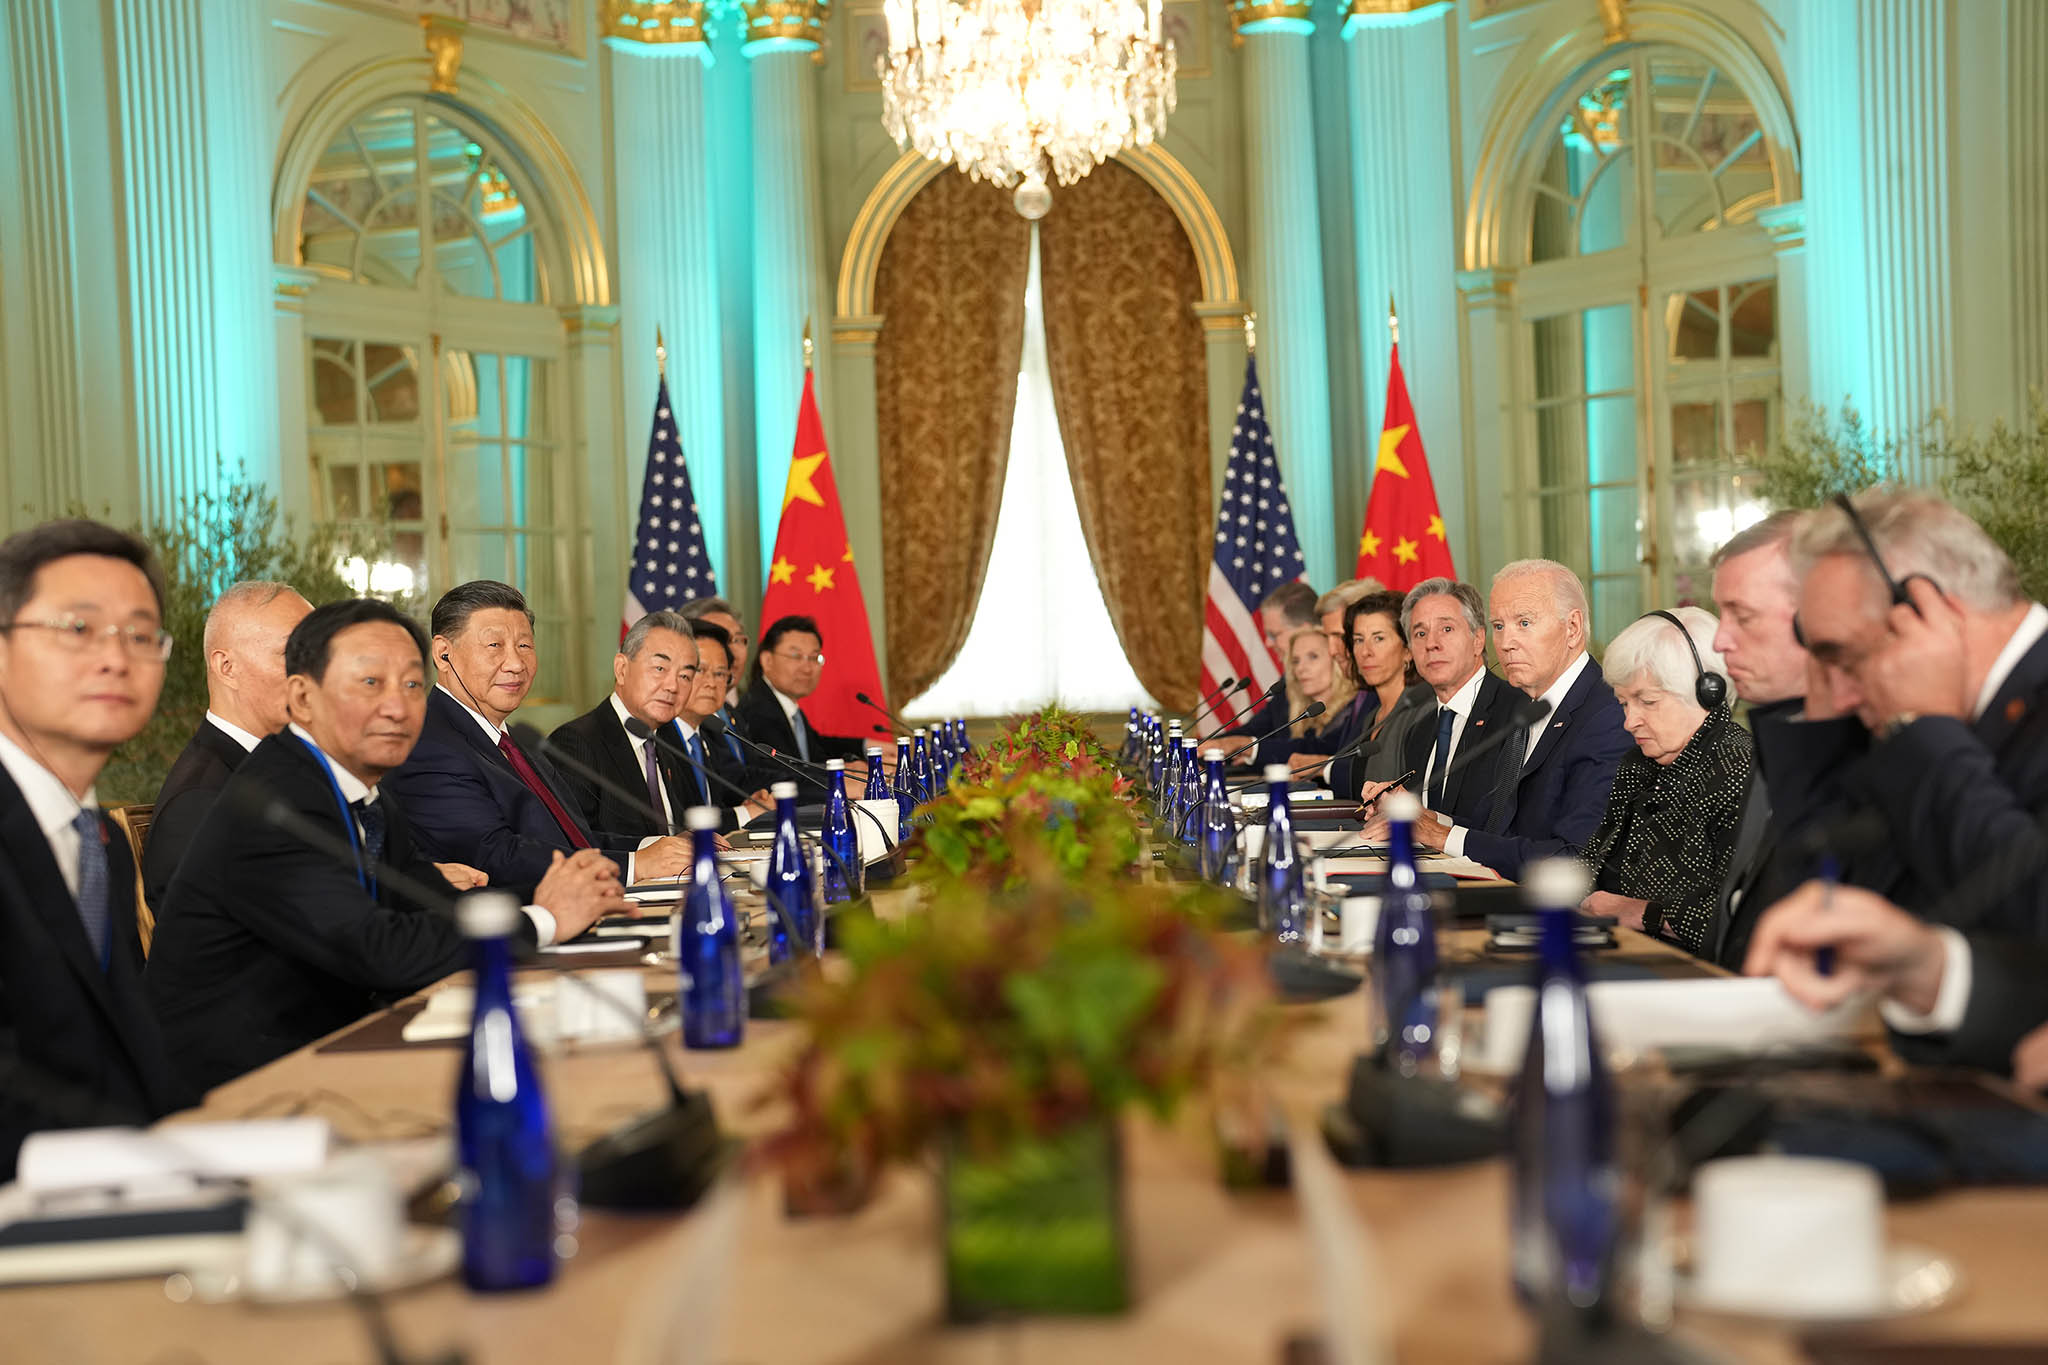 President Biden and senior U.S. officials meet with Chinese President Xi Jinping and senior Chinese officials, during the Asia-Pacific Economic Cooperation summit, Woodside, Calif., Nov. 15, 2023. (Doug Mills/The New York Times)